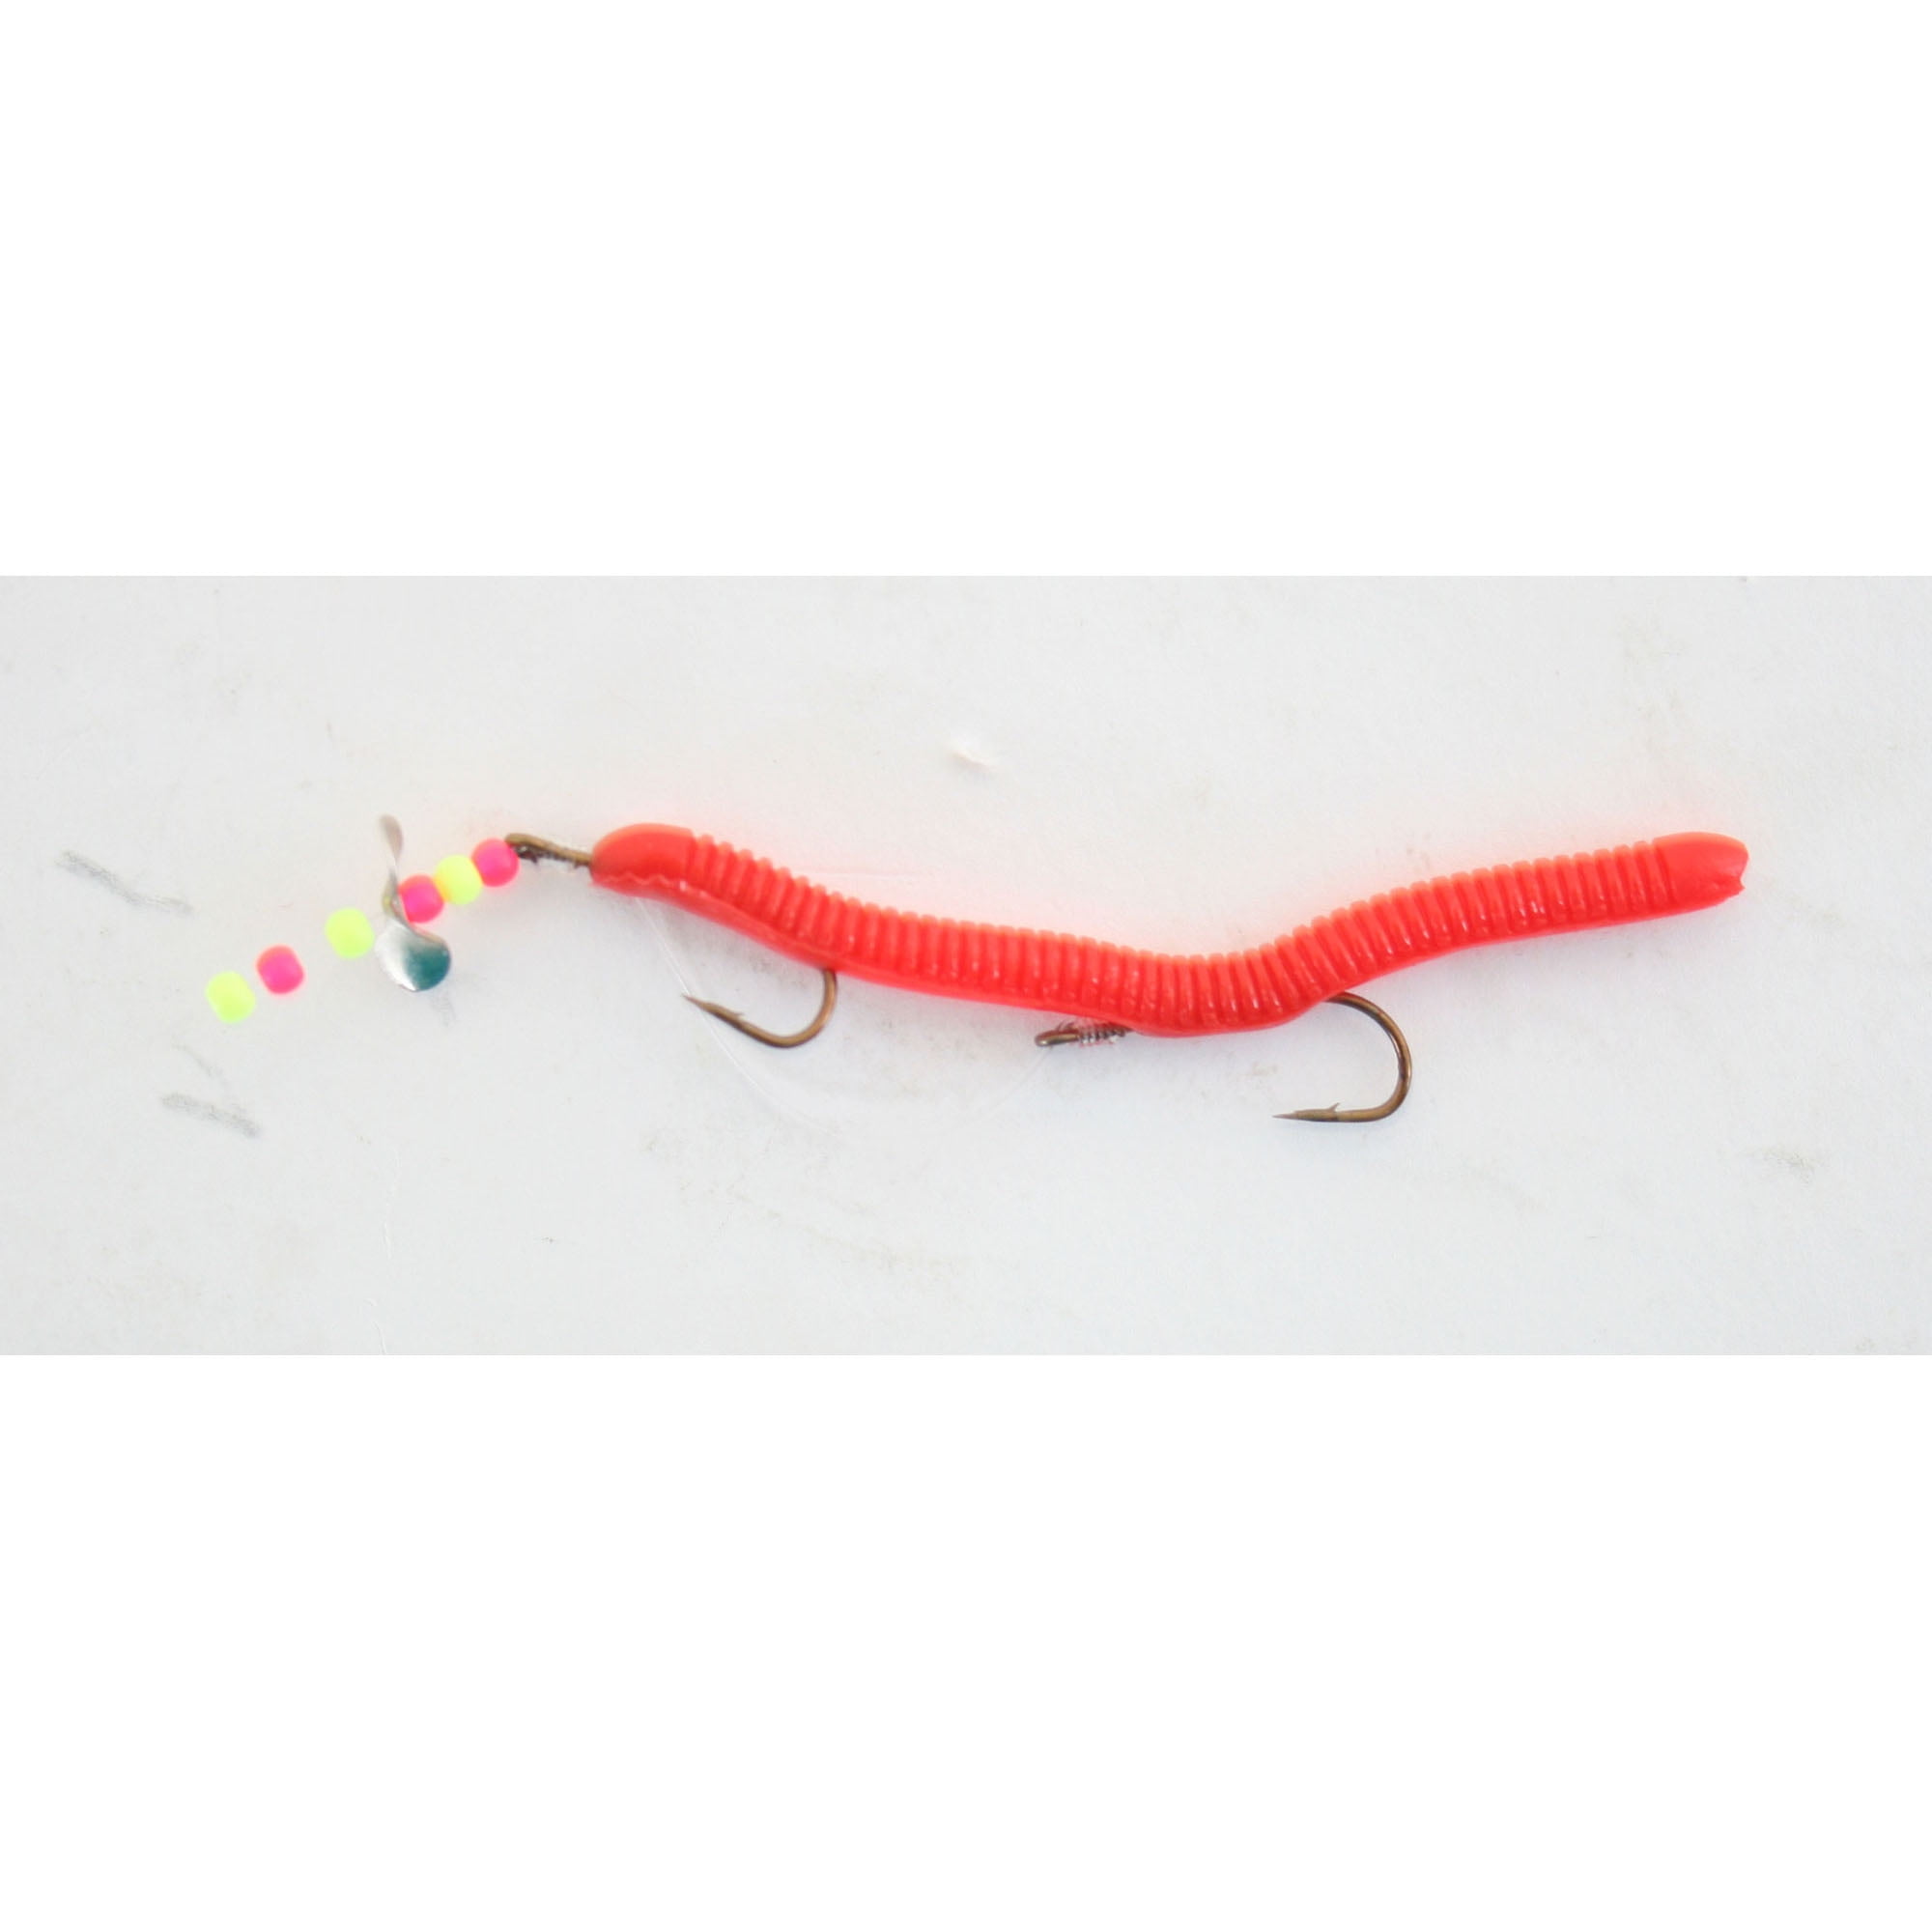 Creme 802-1 Angle Fly Rod Worm Red 2.25 Fishing Sinkbait